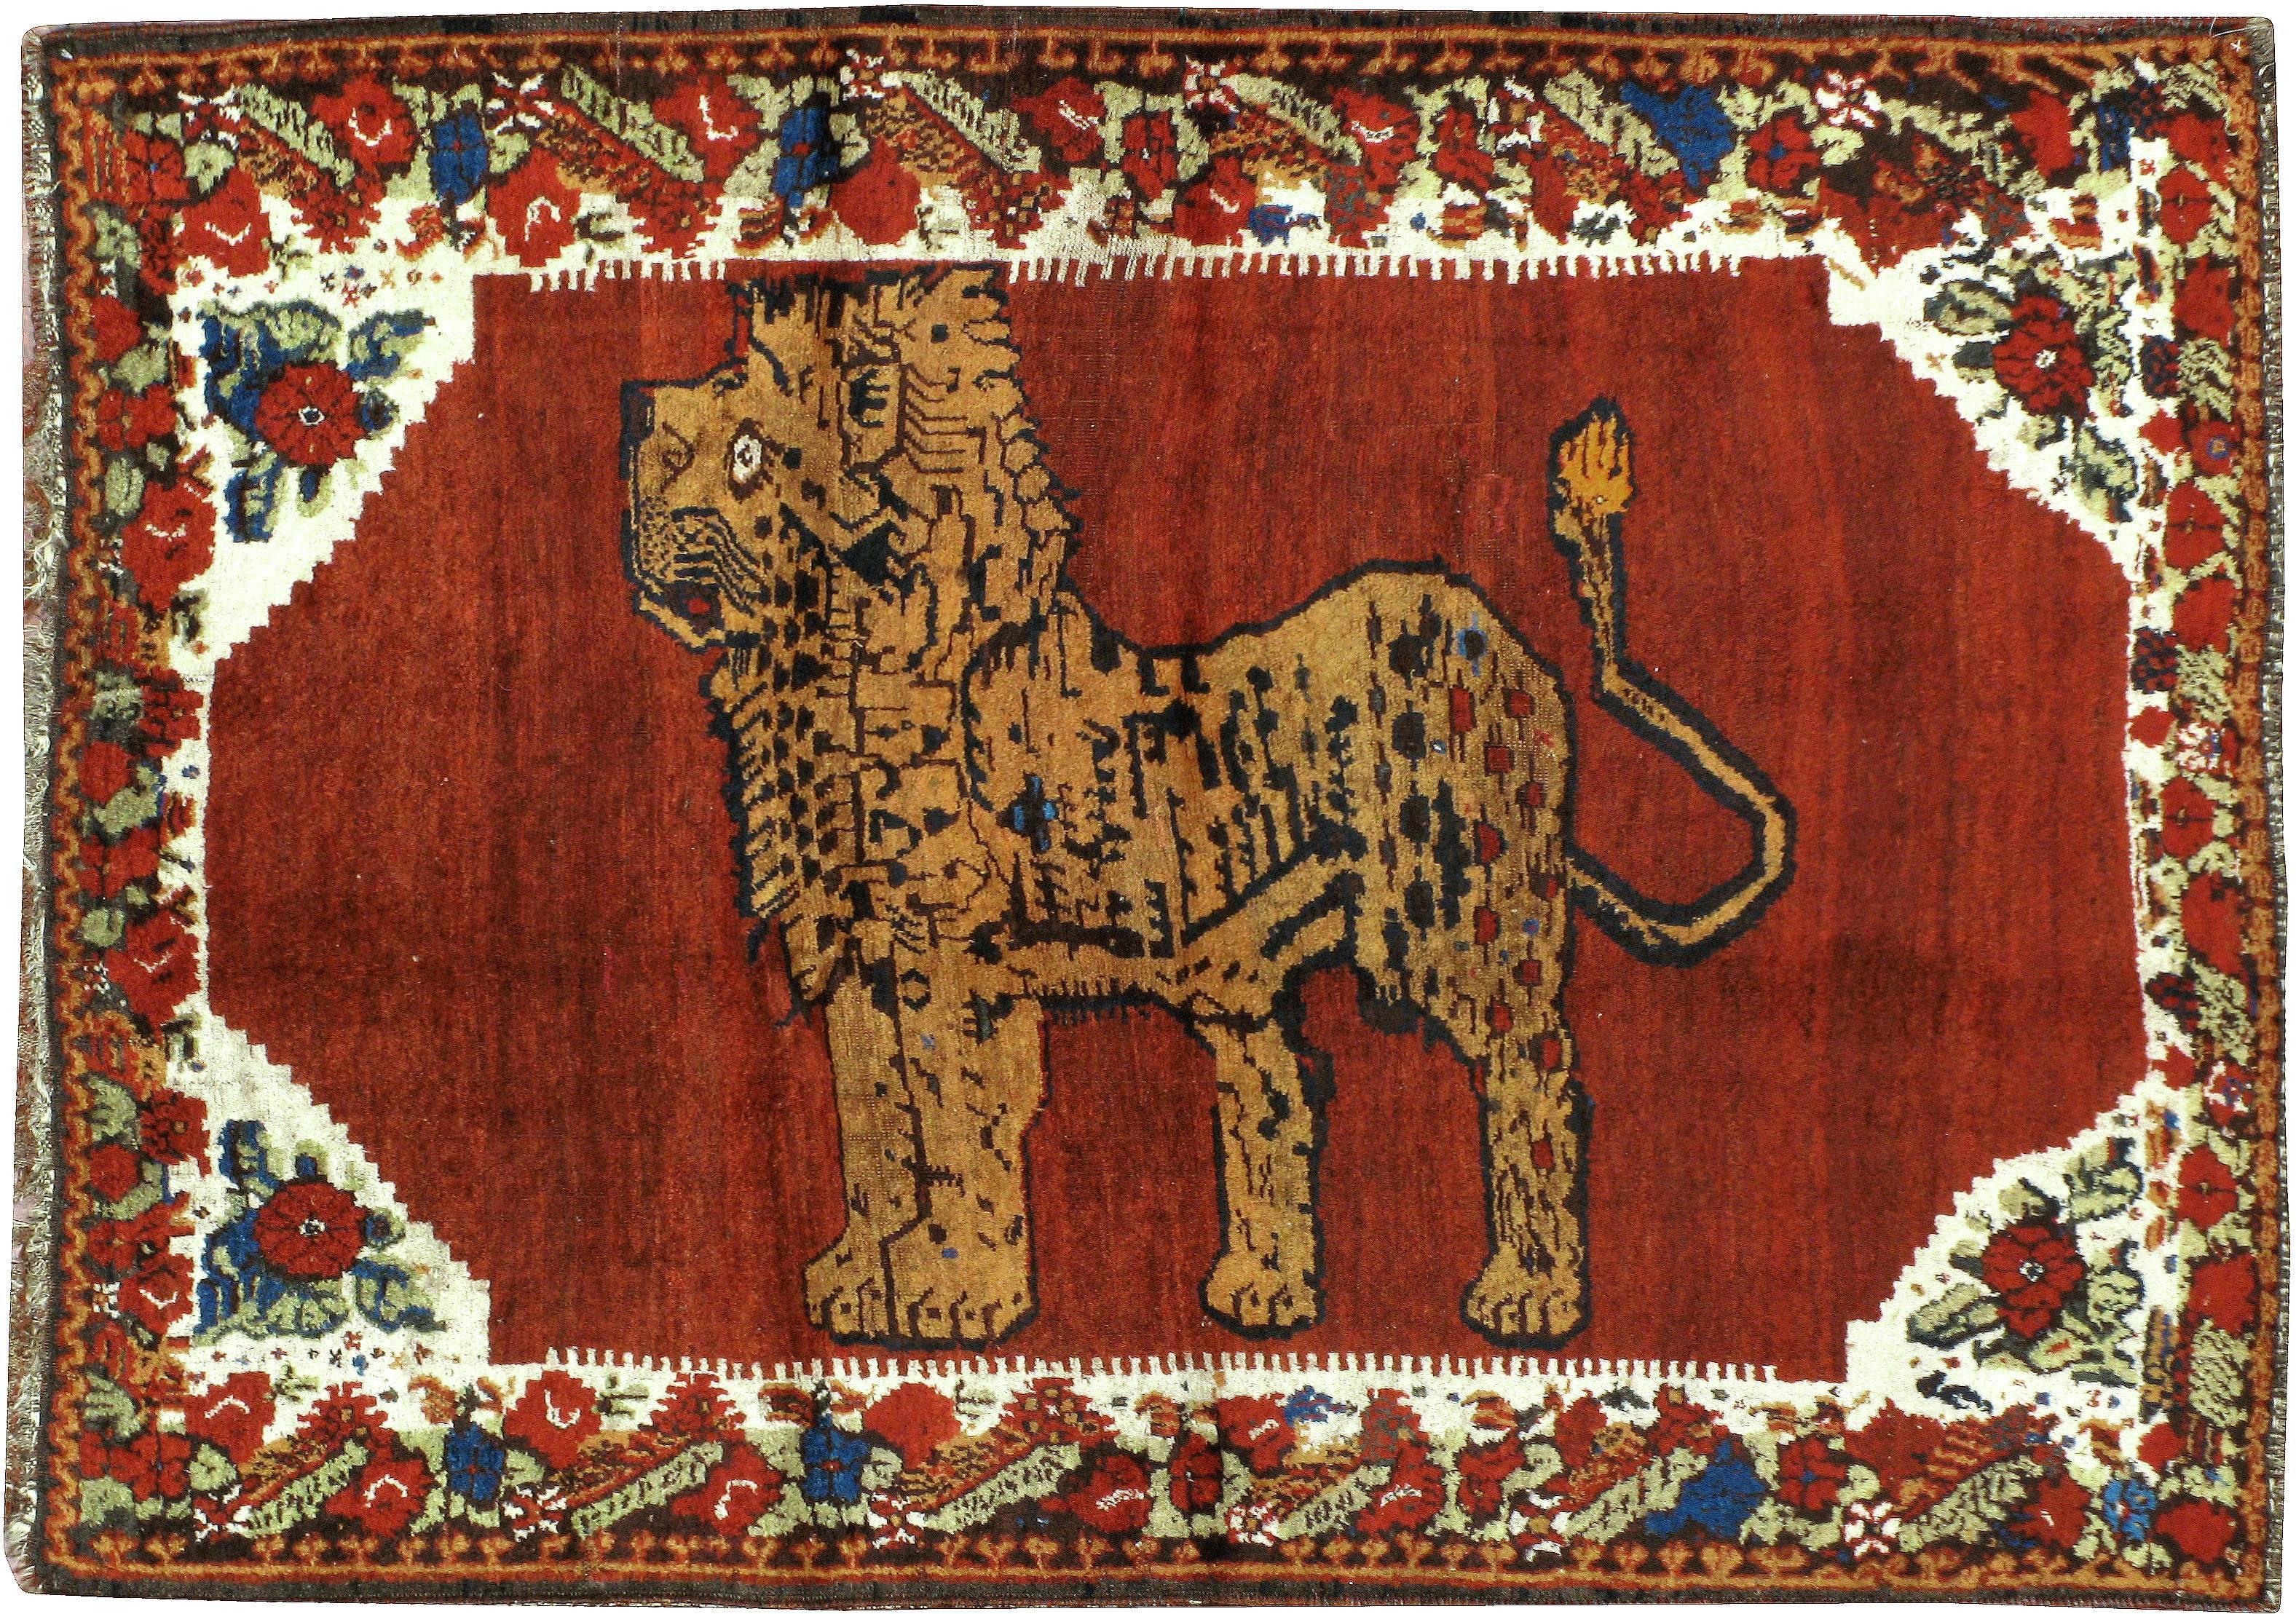 An antique Persian Gabbeh carpet from the first quarter of the 20th century featuring a pictorial design of a lion.

Measures: 4' 4